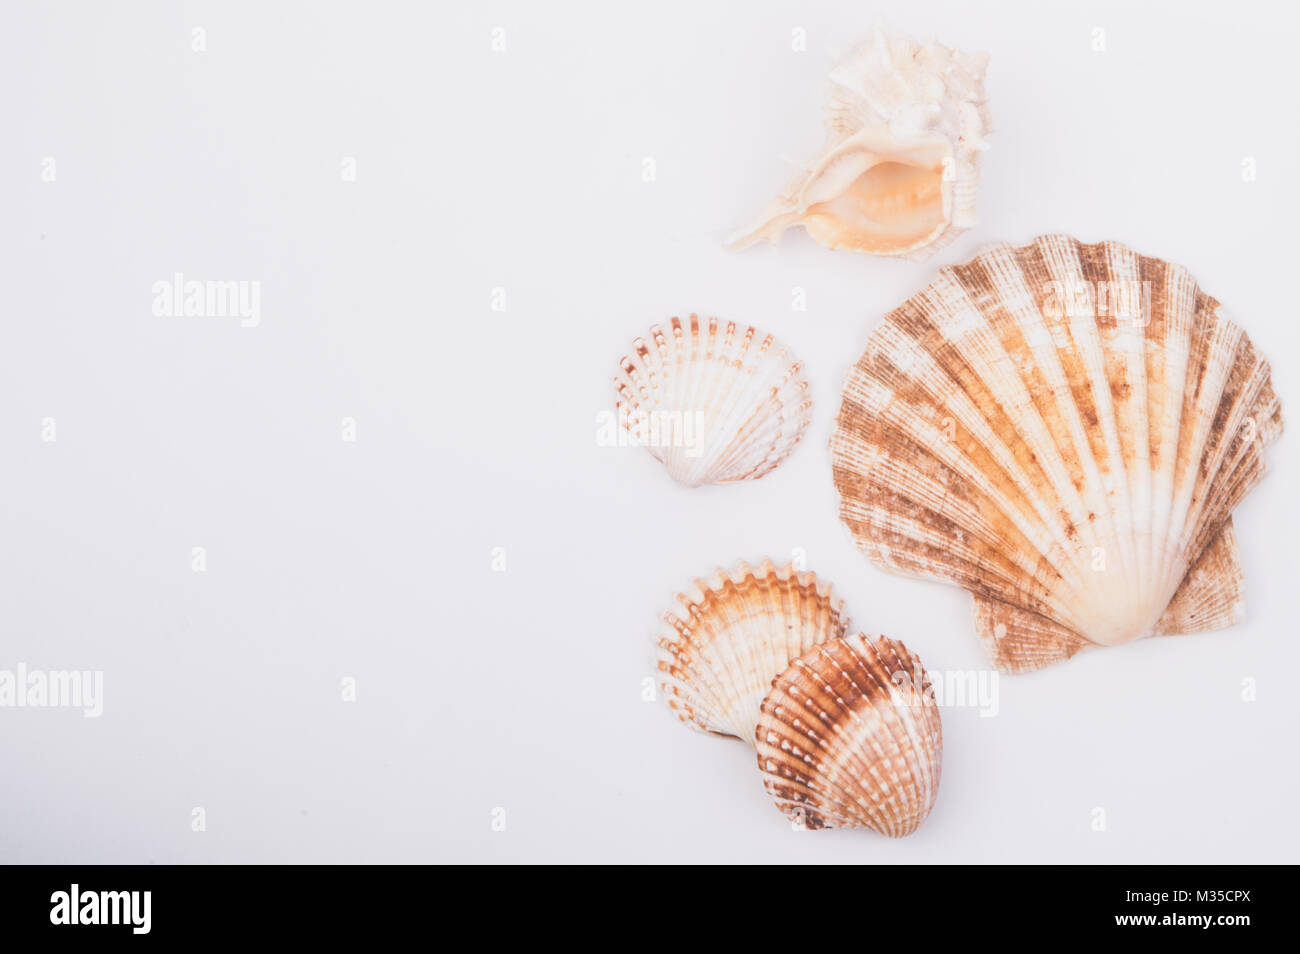 Seashell composition in white background Stock Photo